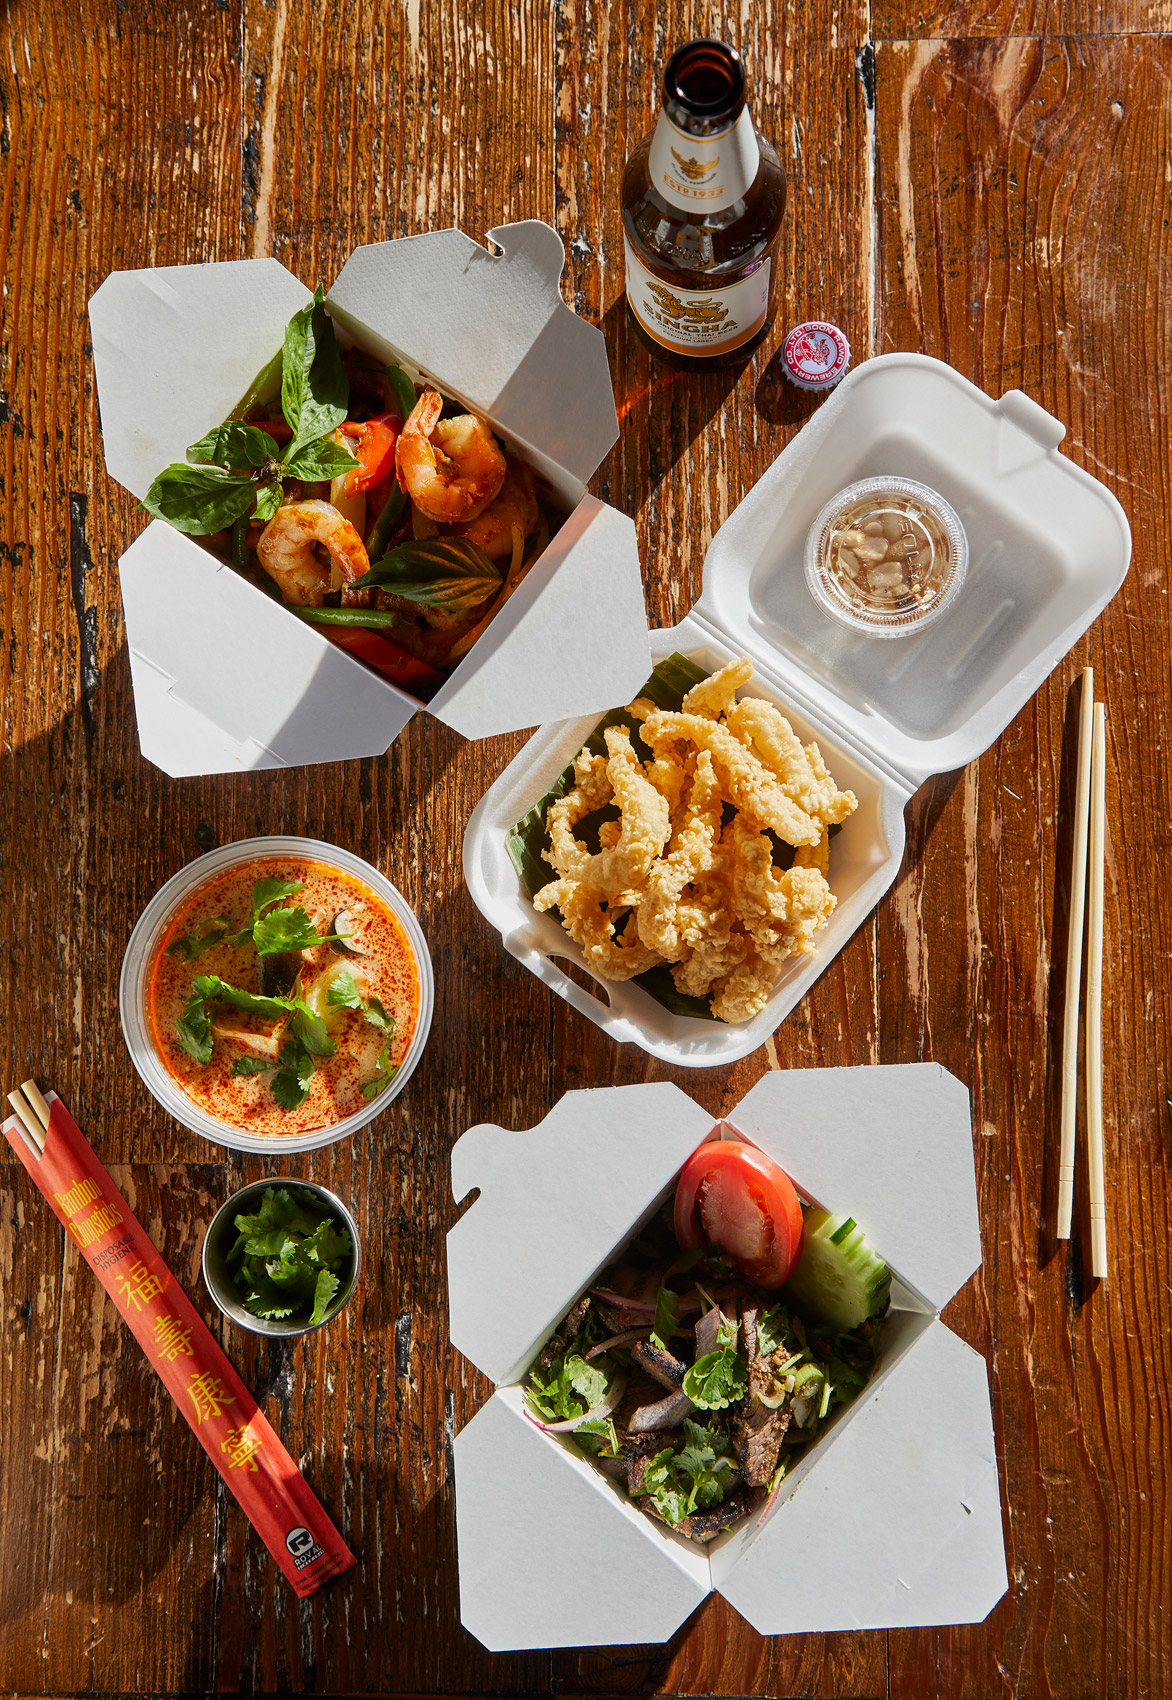 Thai Take Out photo by Chris Kessler Photography.  Chris Kessler is a freelance Photographer based in Milwaukee Wisconsin. Specializing in Food photography and portraiture.